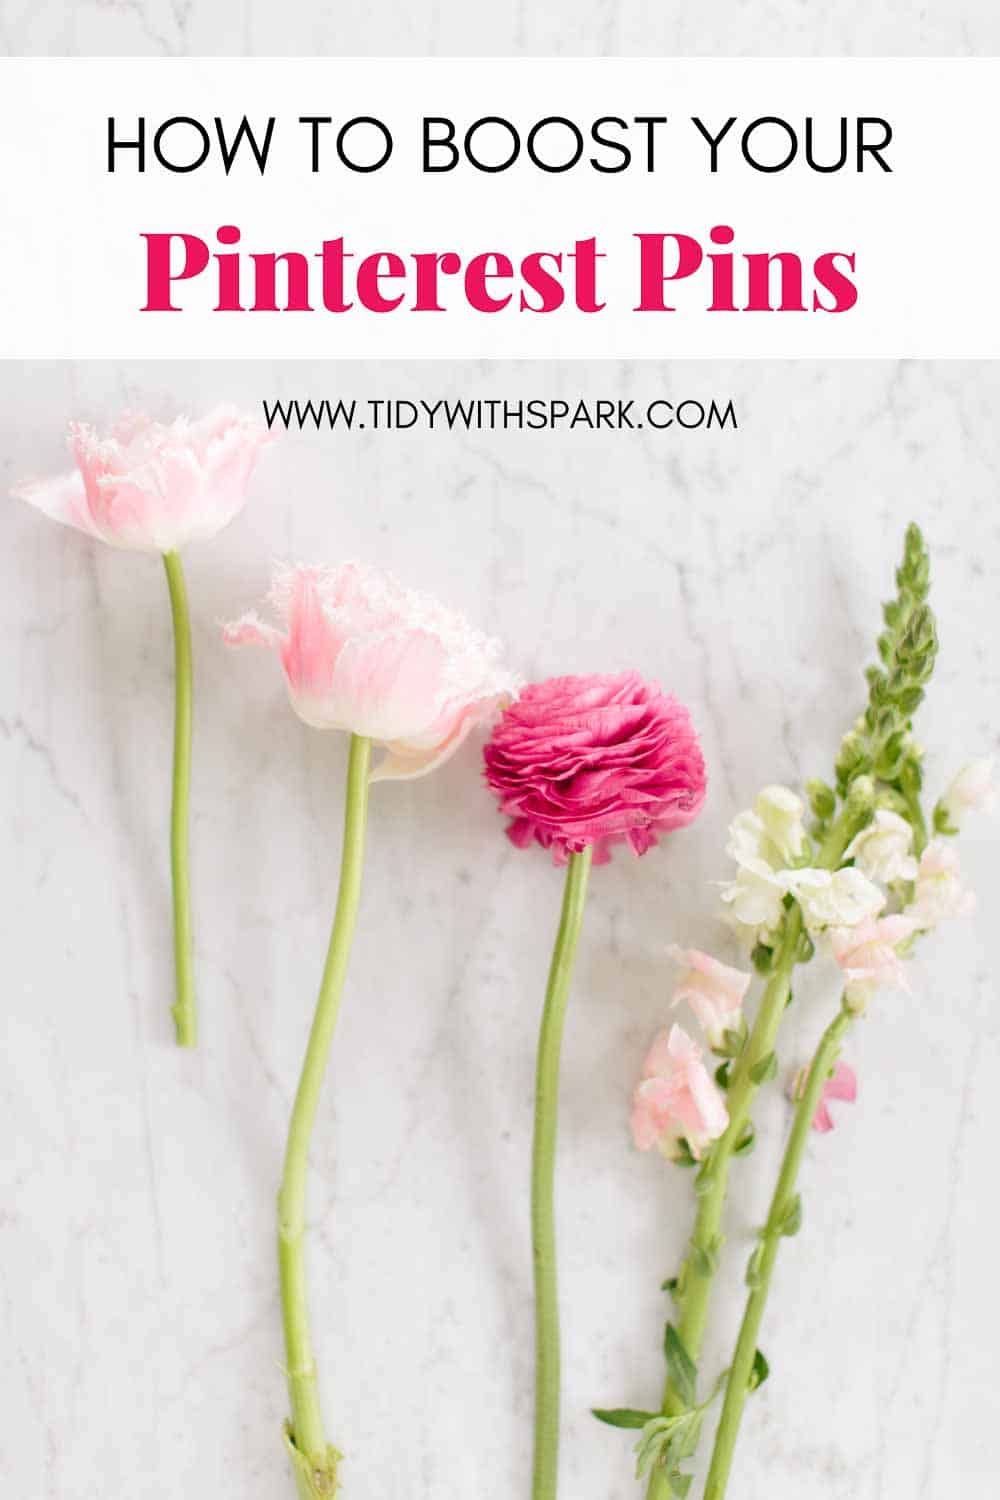 Promotional image for How to get your pin noticed on Pinterest for tidy with spark blog